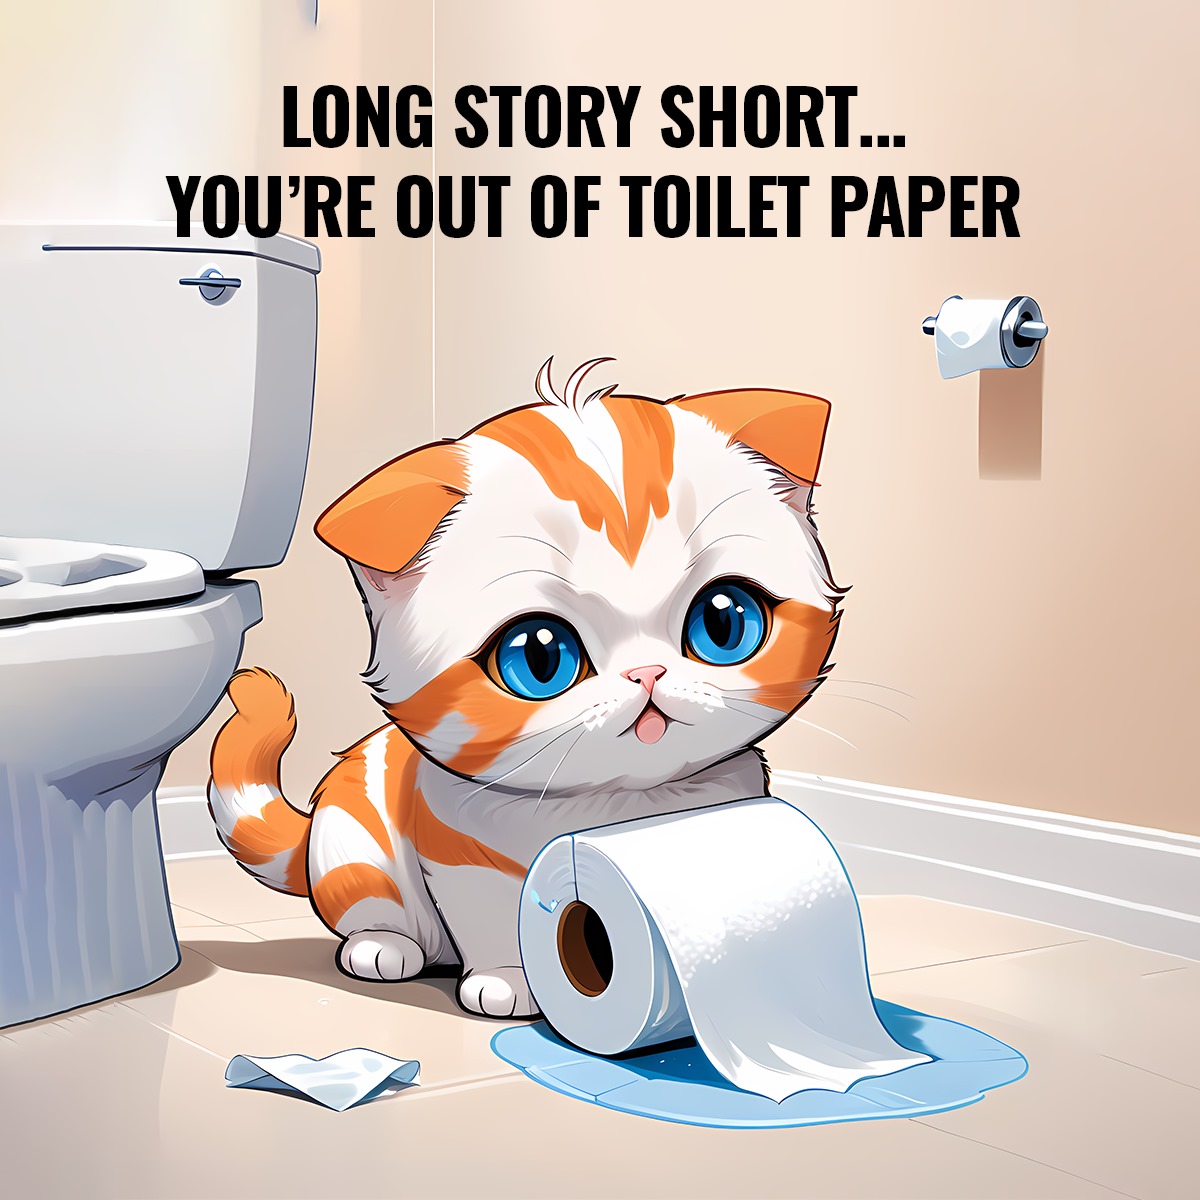 LONG STORY SHORT... YOU'RE OUT OF TOILET PAPER